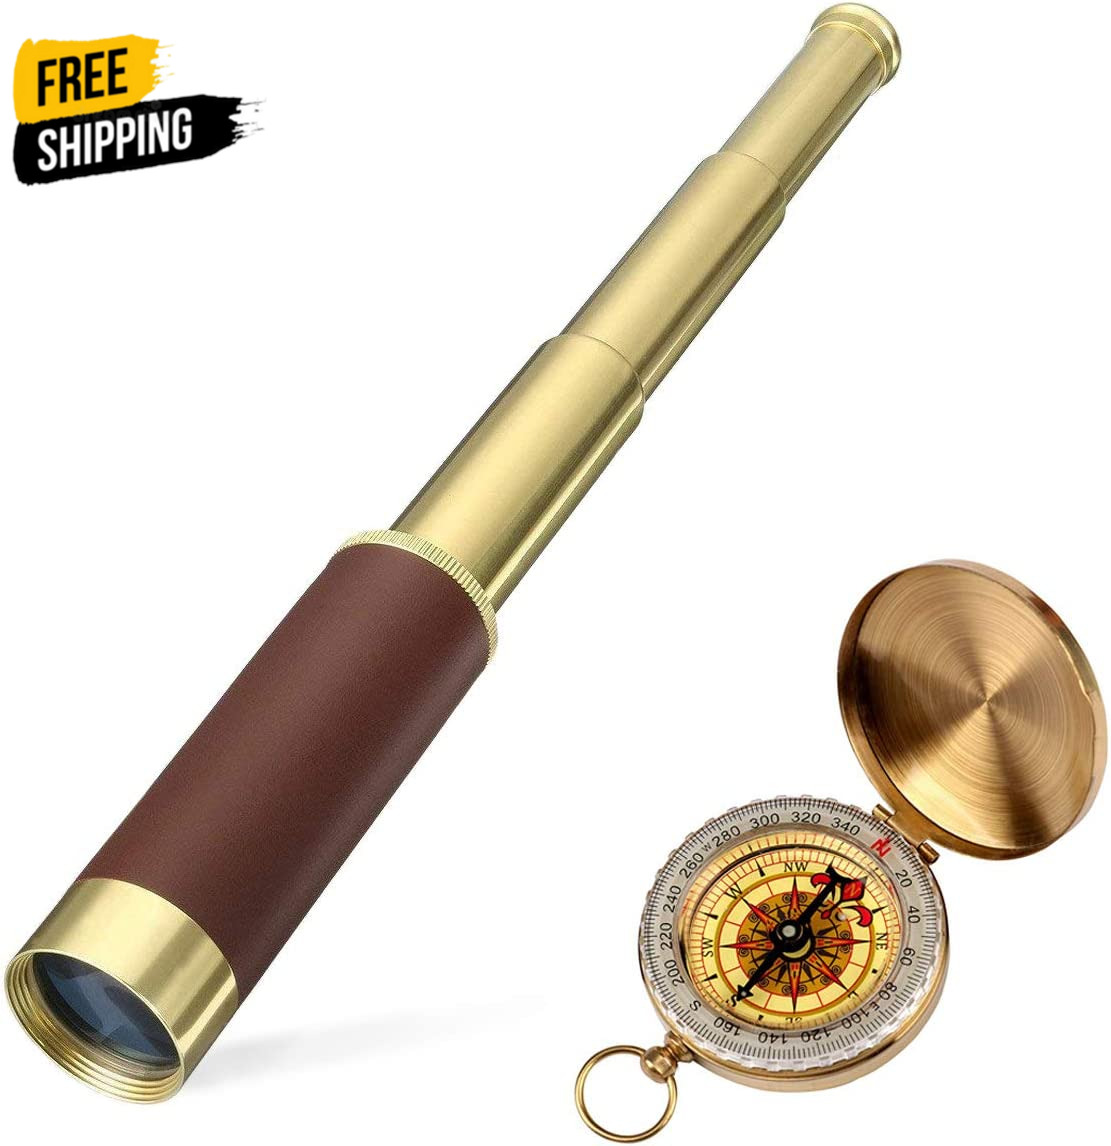 Retro Pirate Telescope Zoomable 25X30 Spyglass Portable Collapsible Handheld Tel